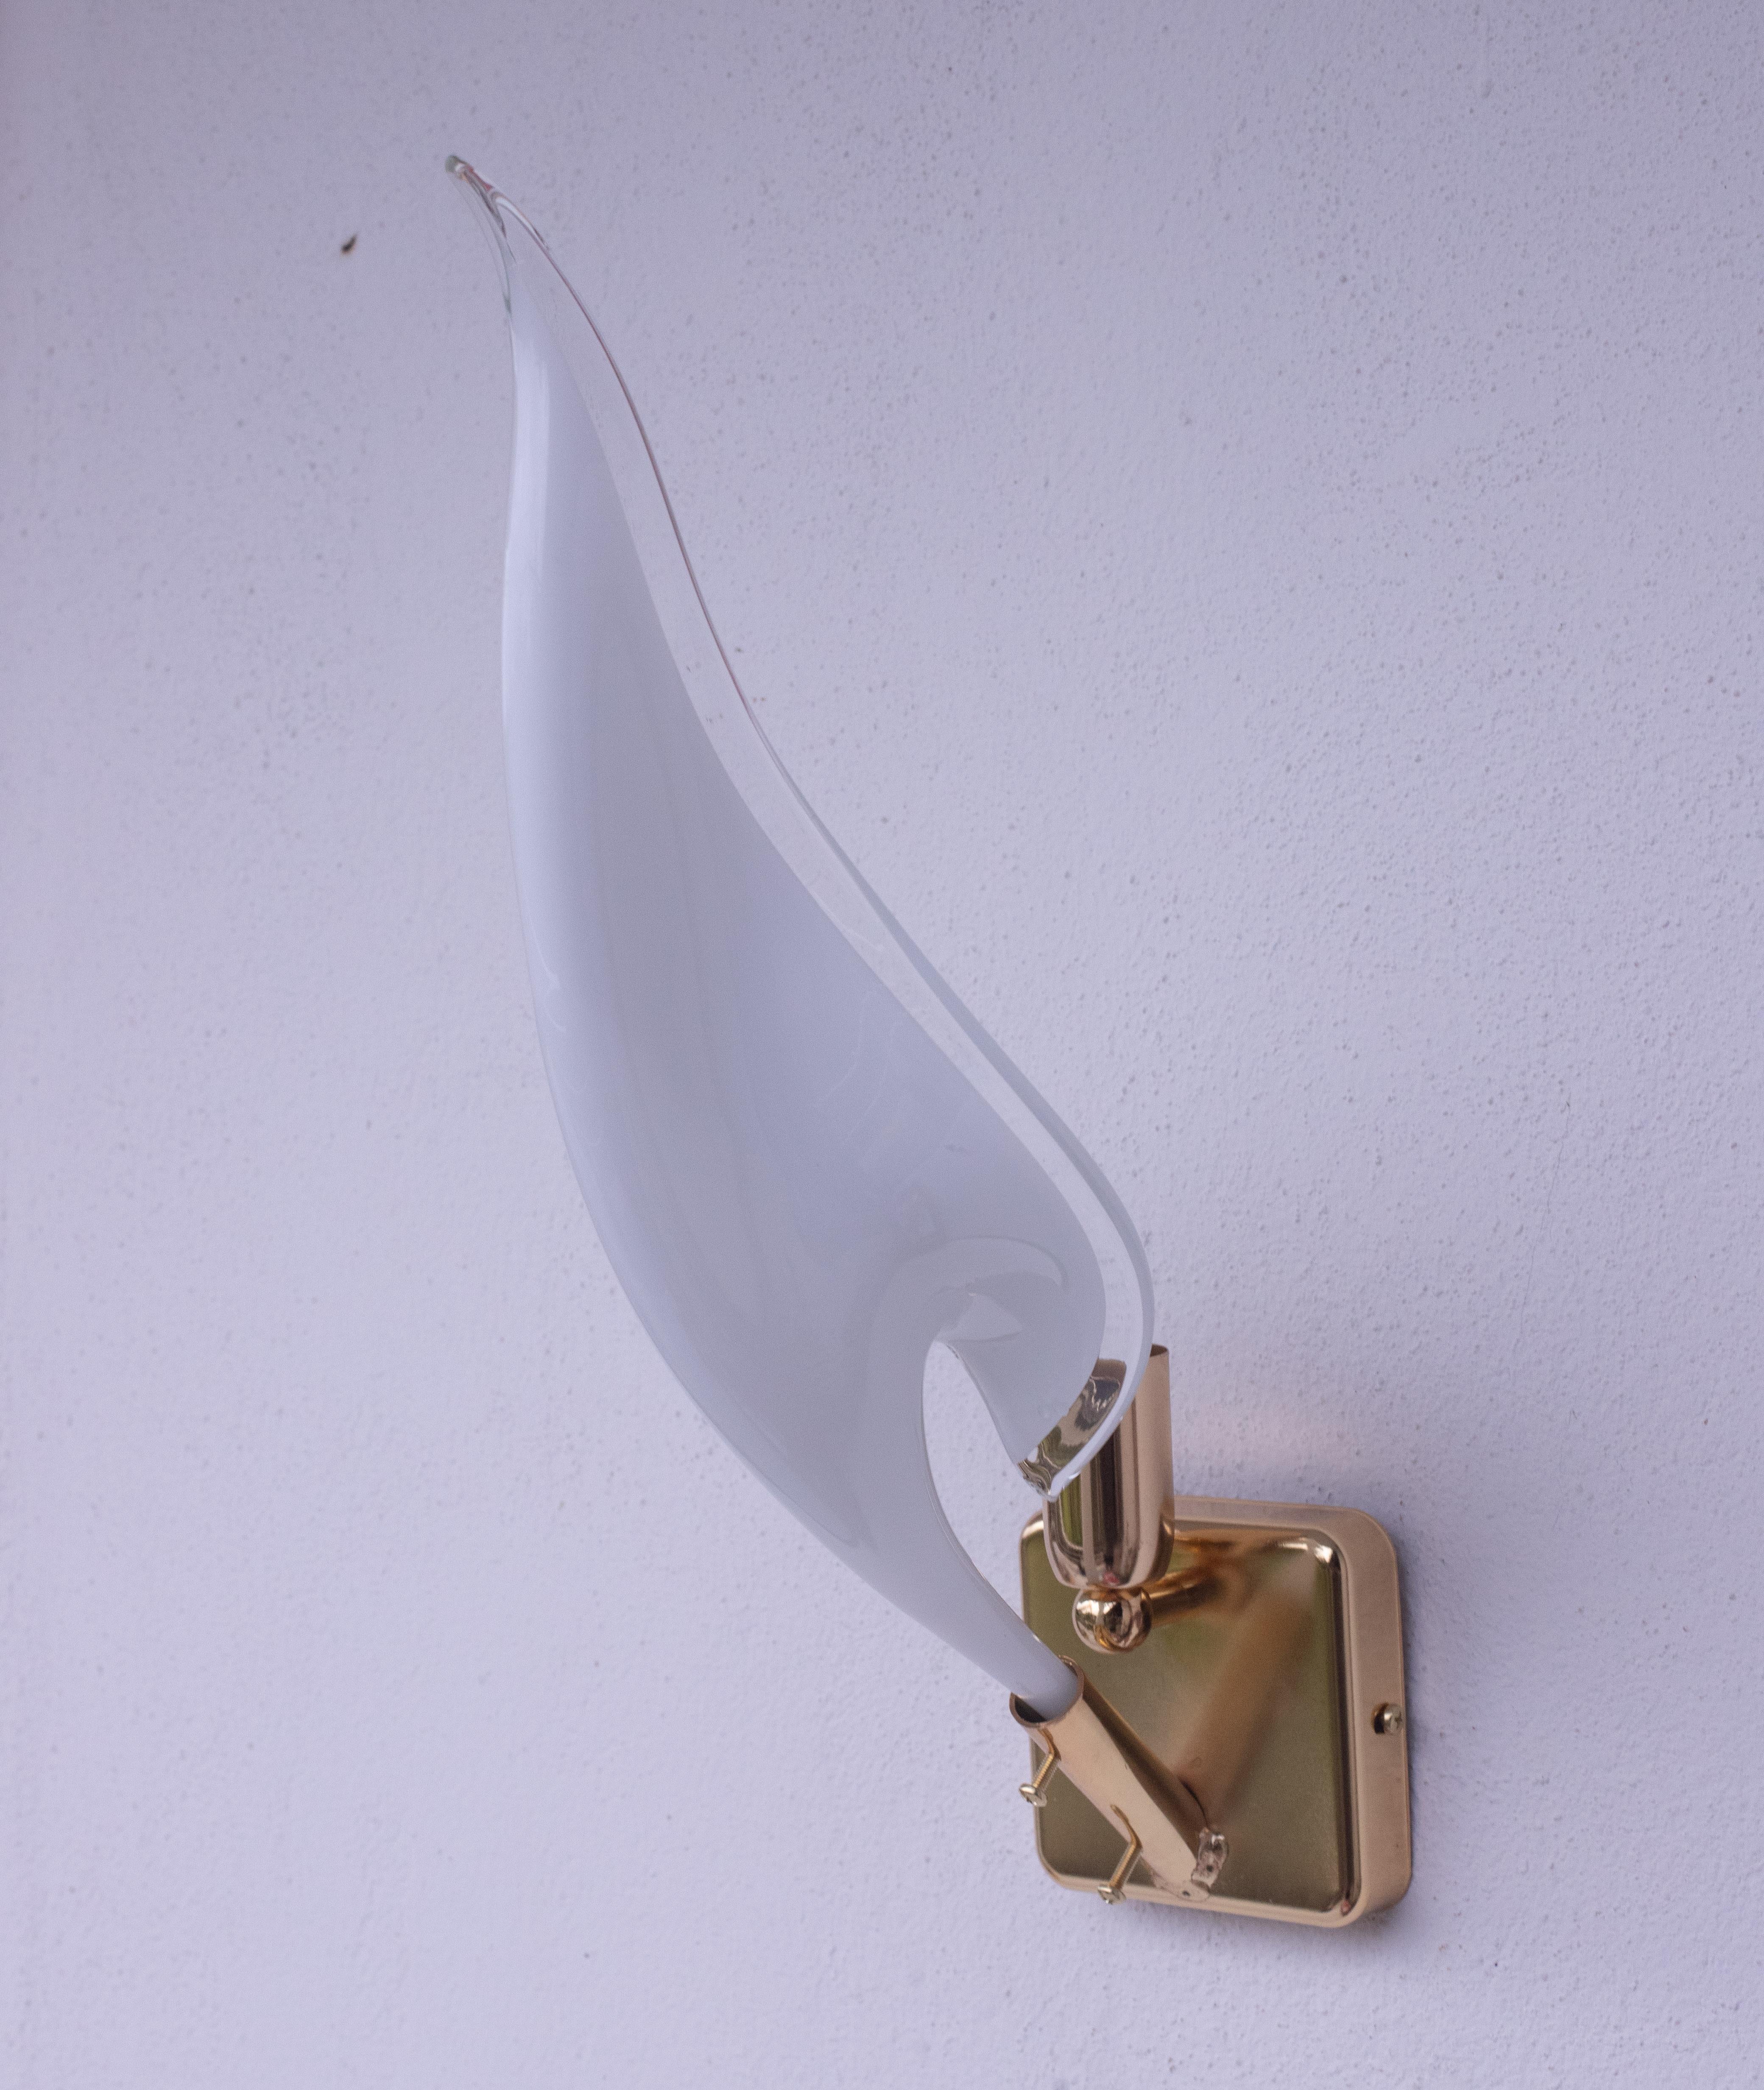 Set of 2 Murano Wall Light by Franco Luce, 1970s For Sale 3